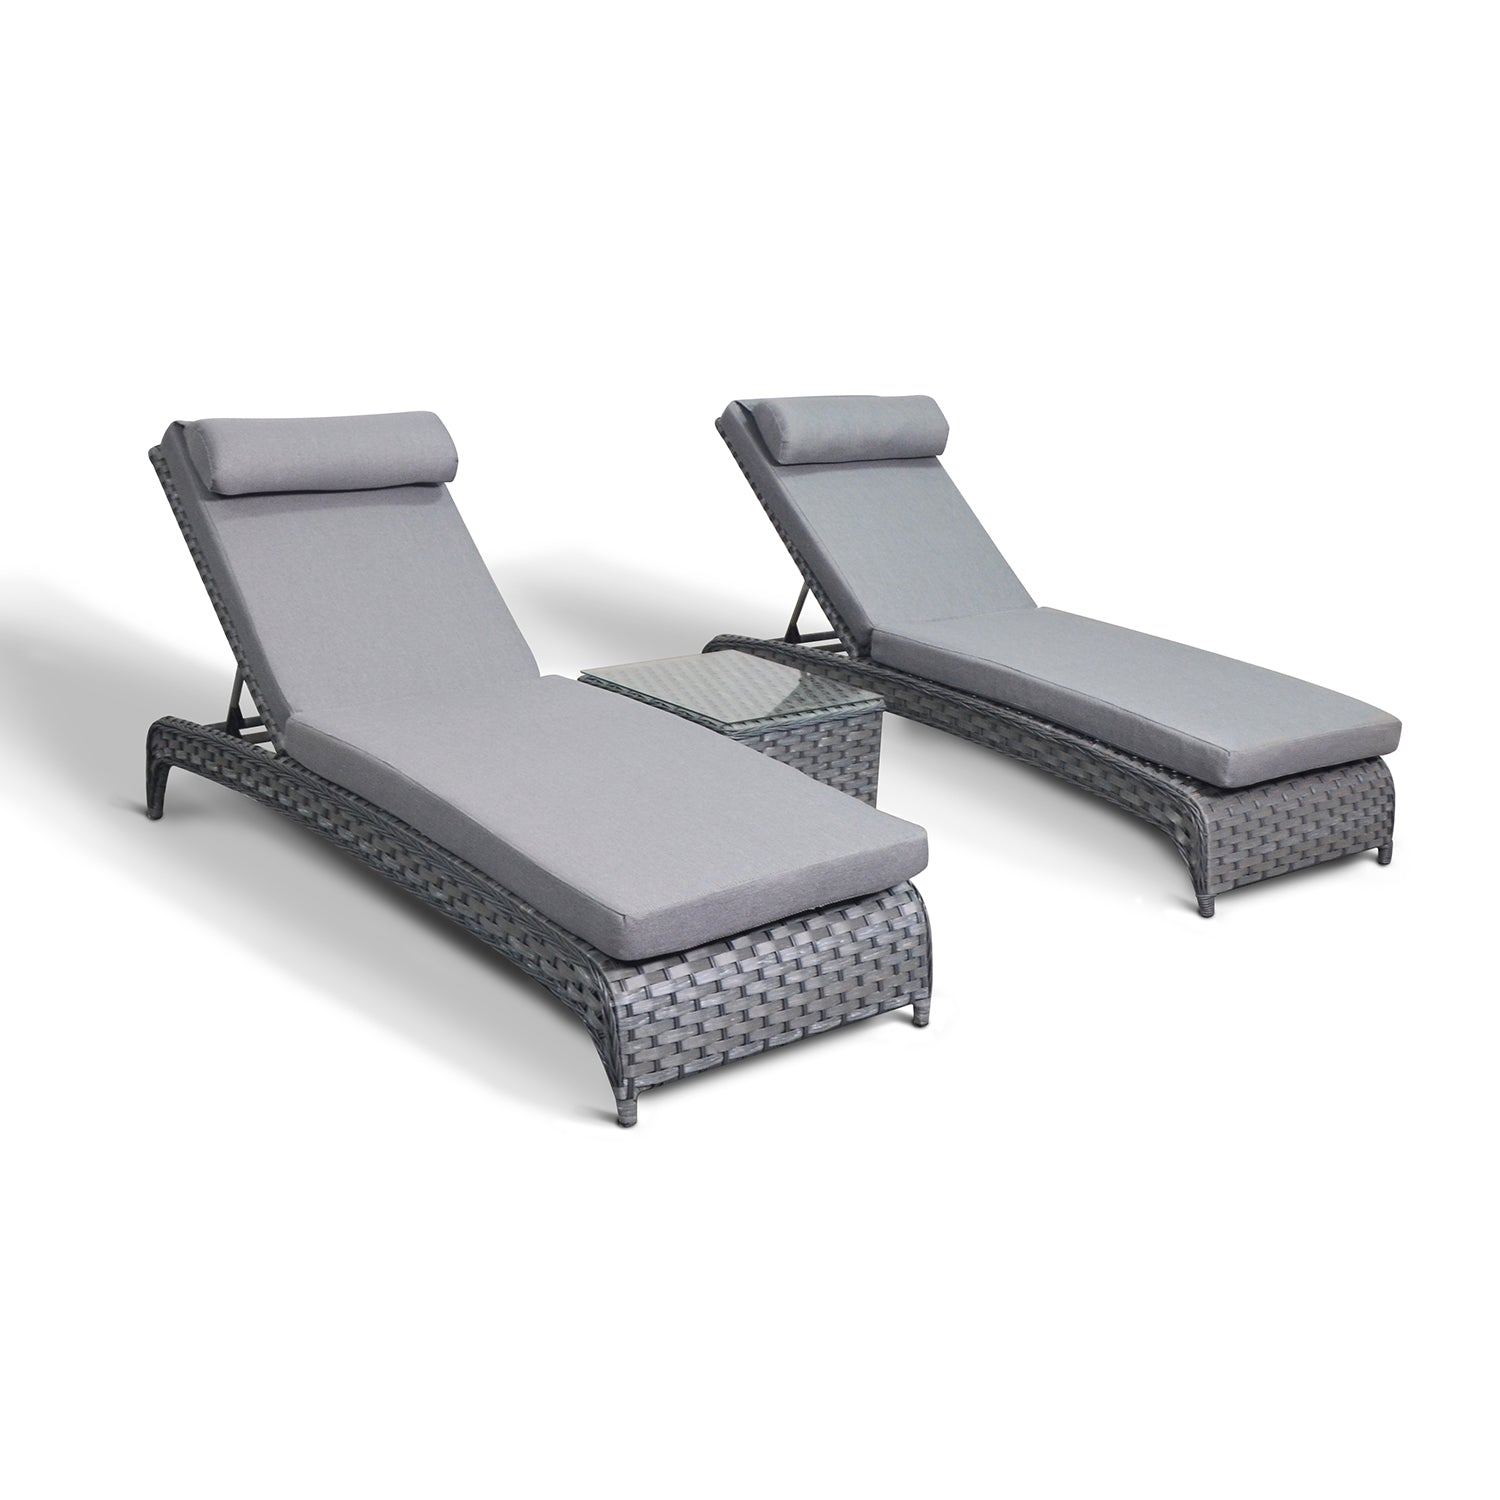 Replacement Cushion Covers RCC-06 in Grey for Victoria / Oxford Lounger Set